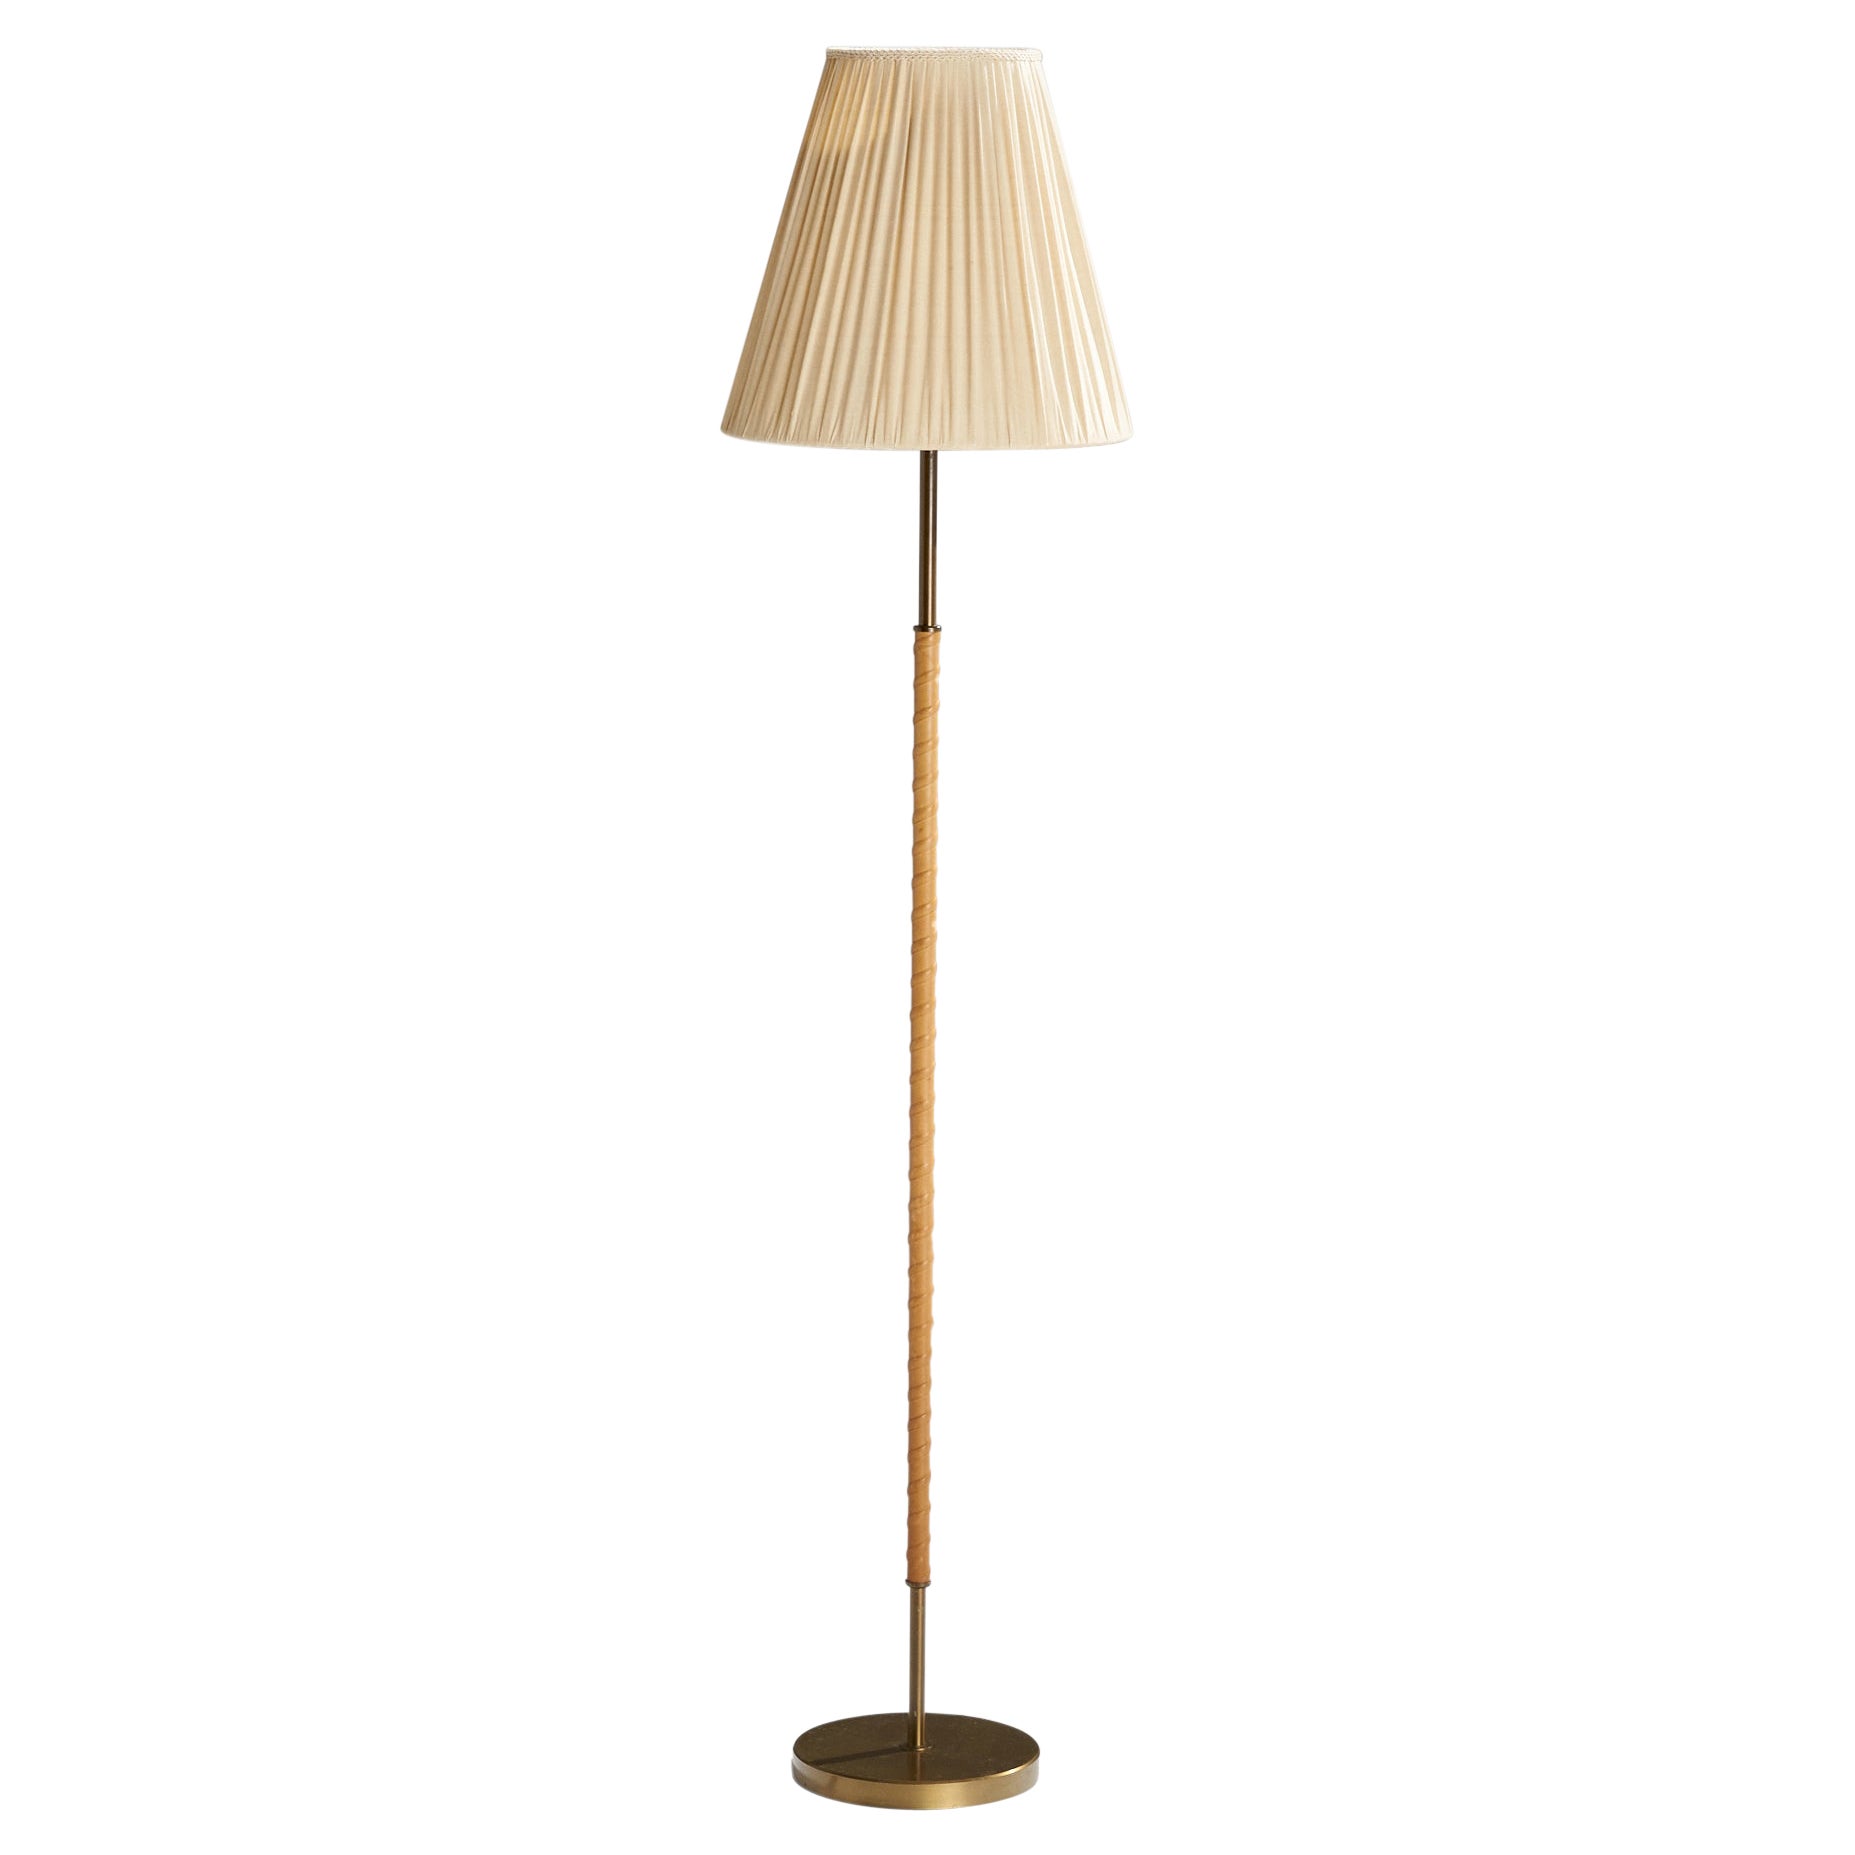 Harald Notini, Floor Lamp, Brass, Leather, Fabric, Sweden, 1940s For Sale